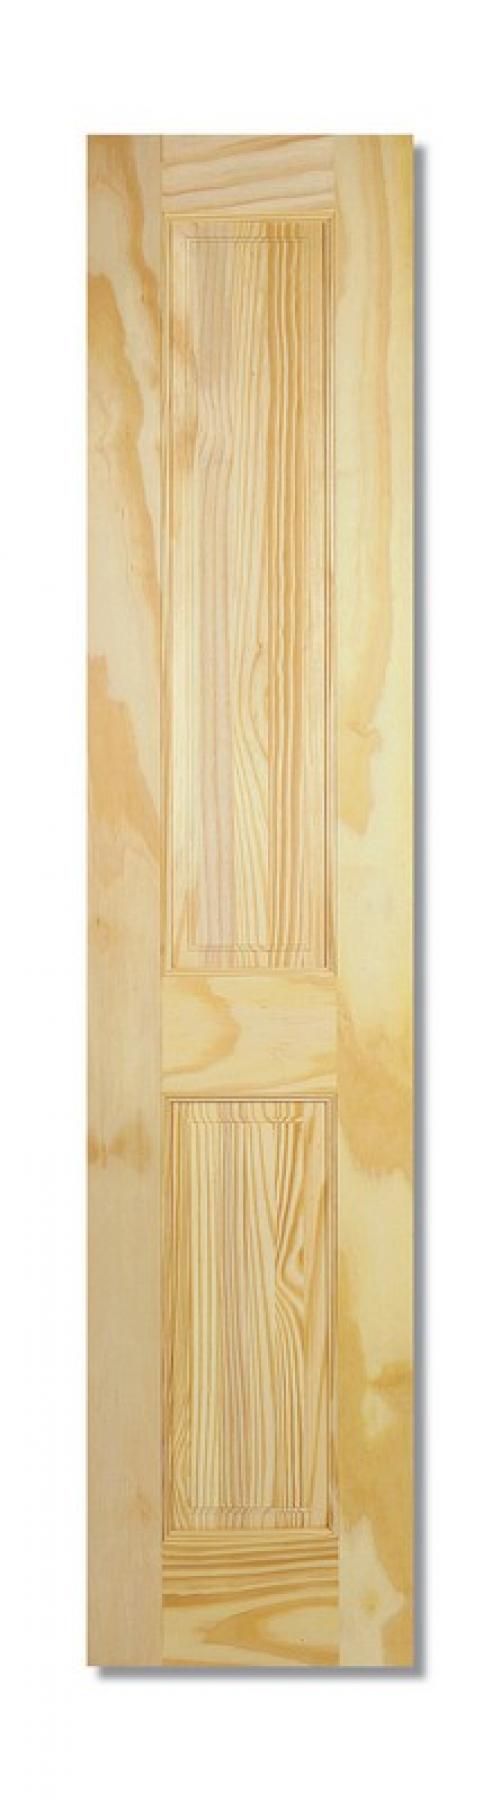 Image for 78X15 2 PANEL CLEAR PINE